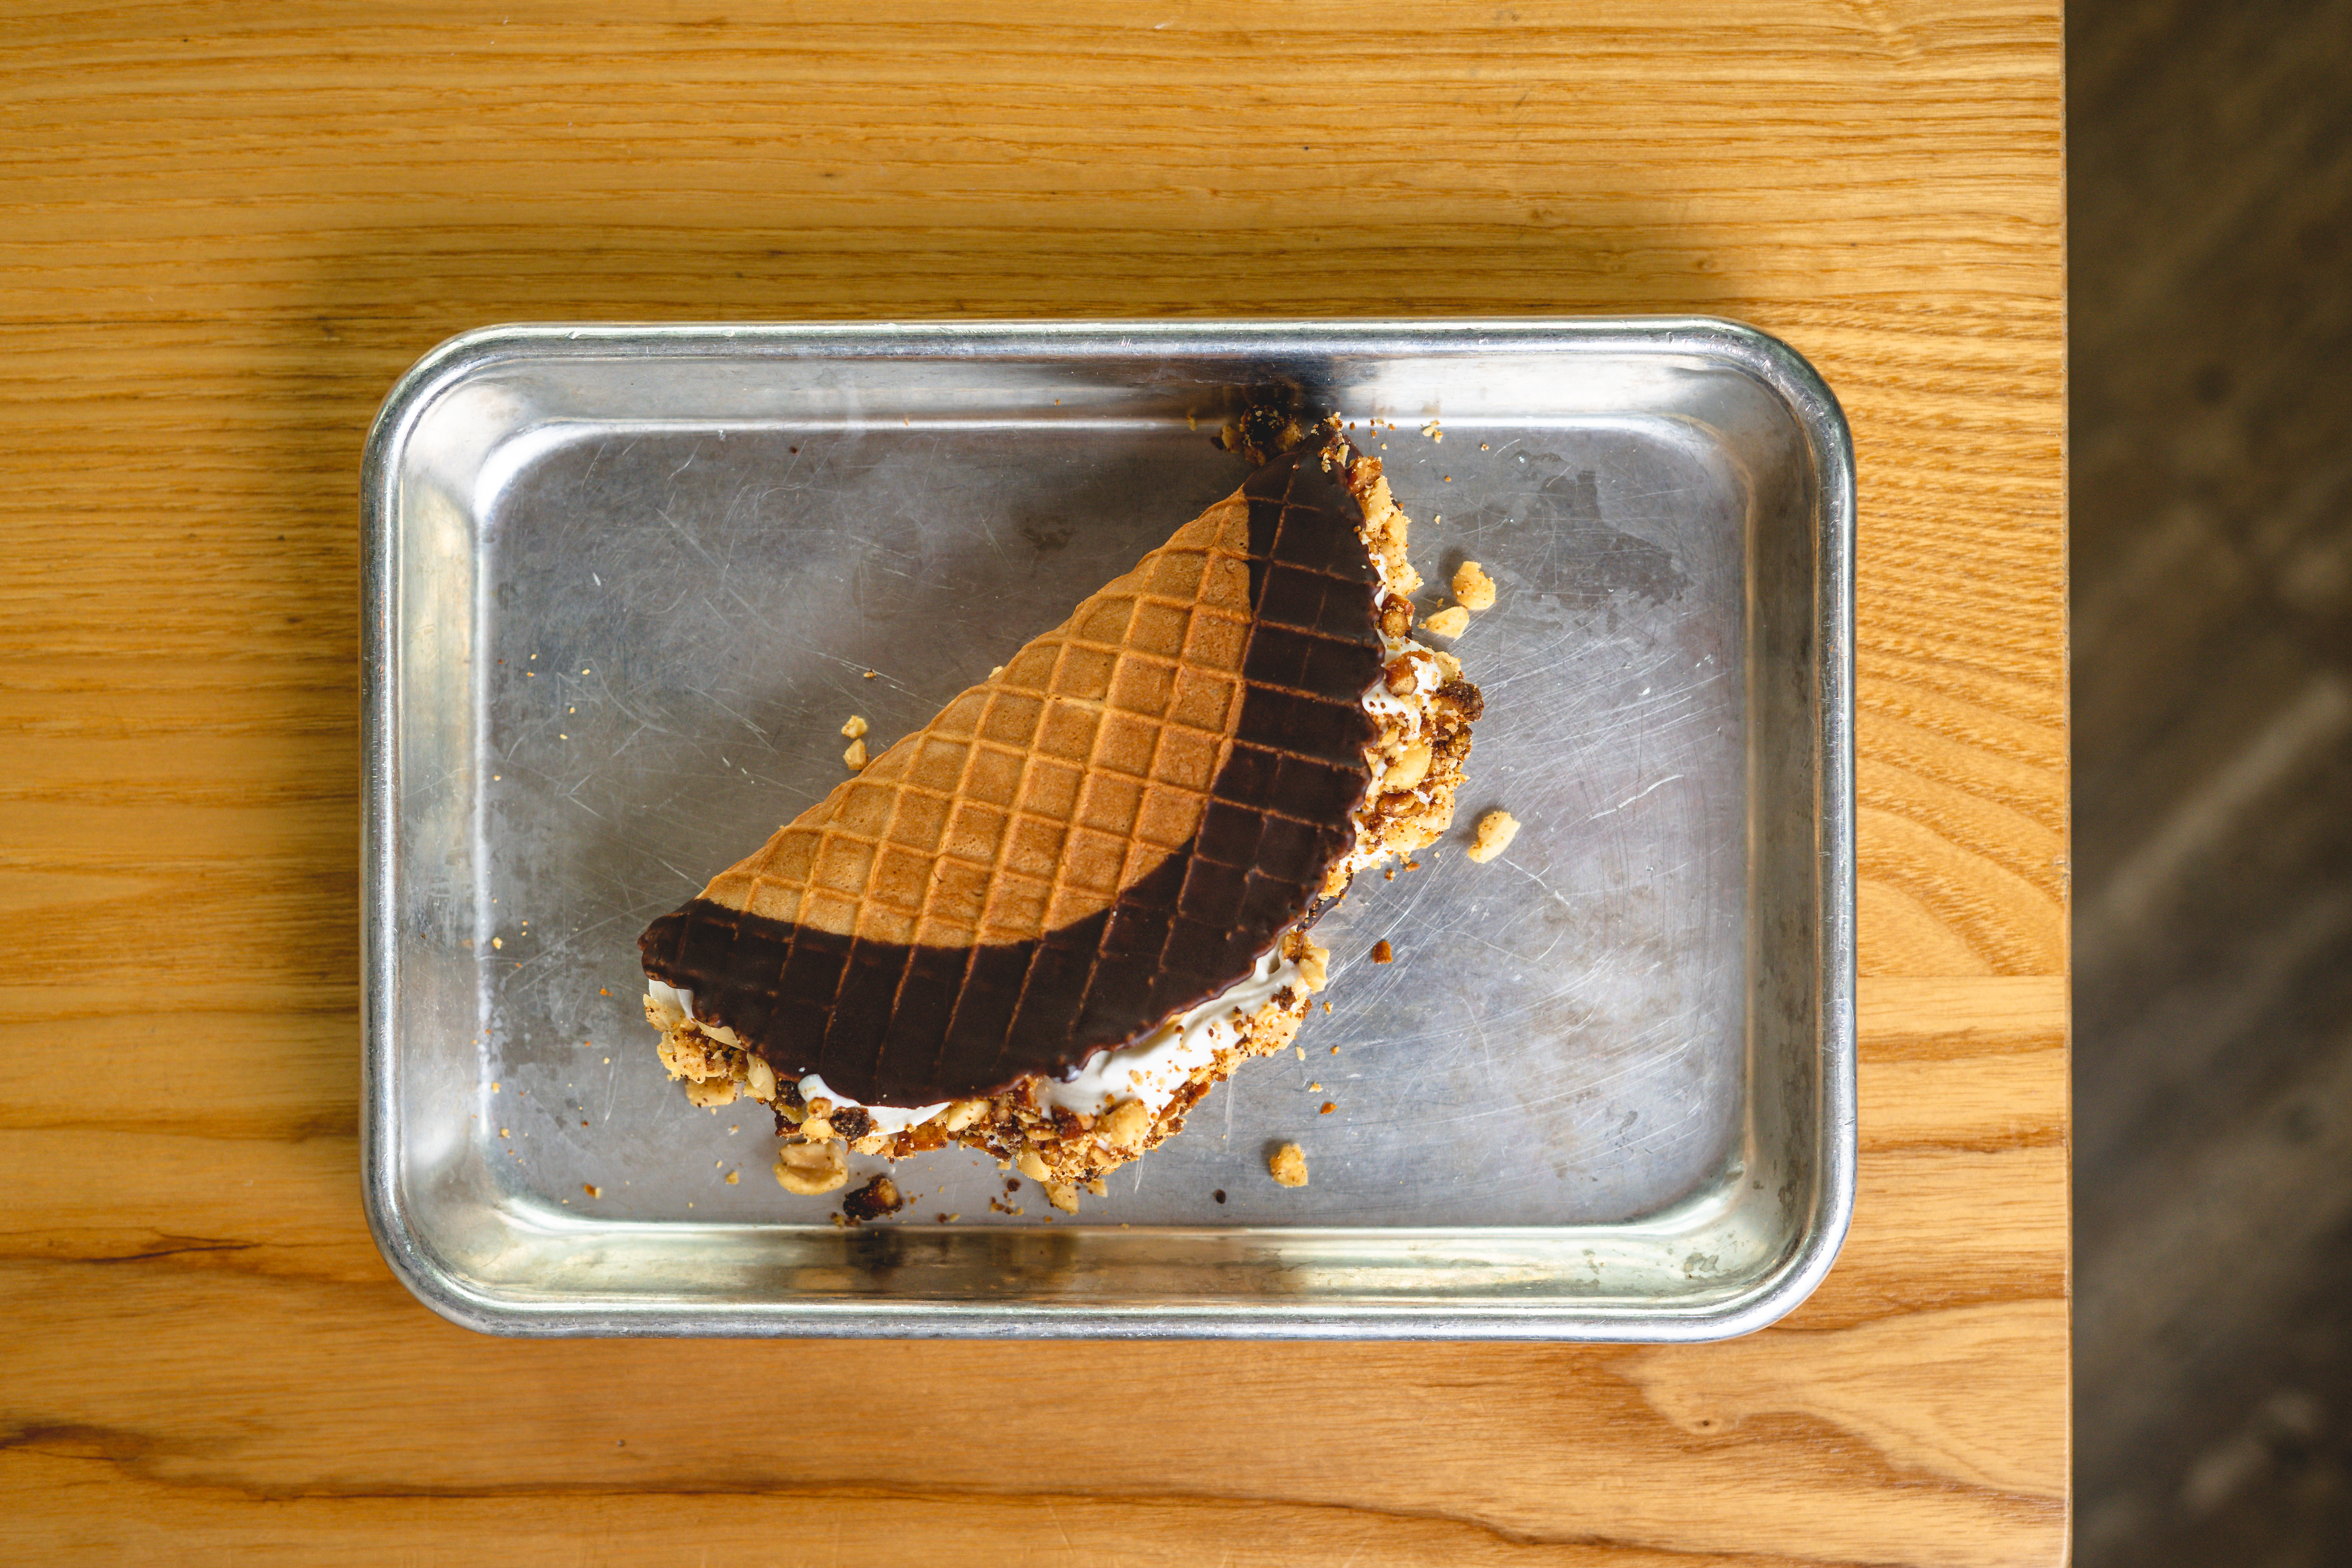 A frozen ice cream treat, a Choco Taco, on a metal platter.